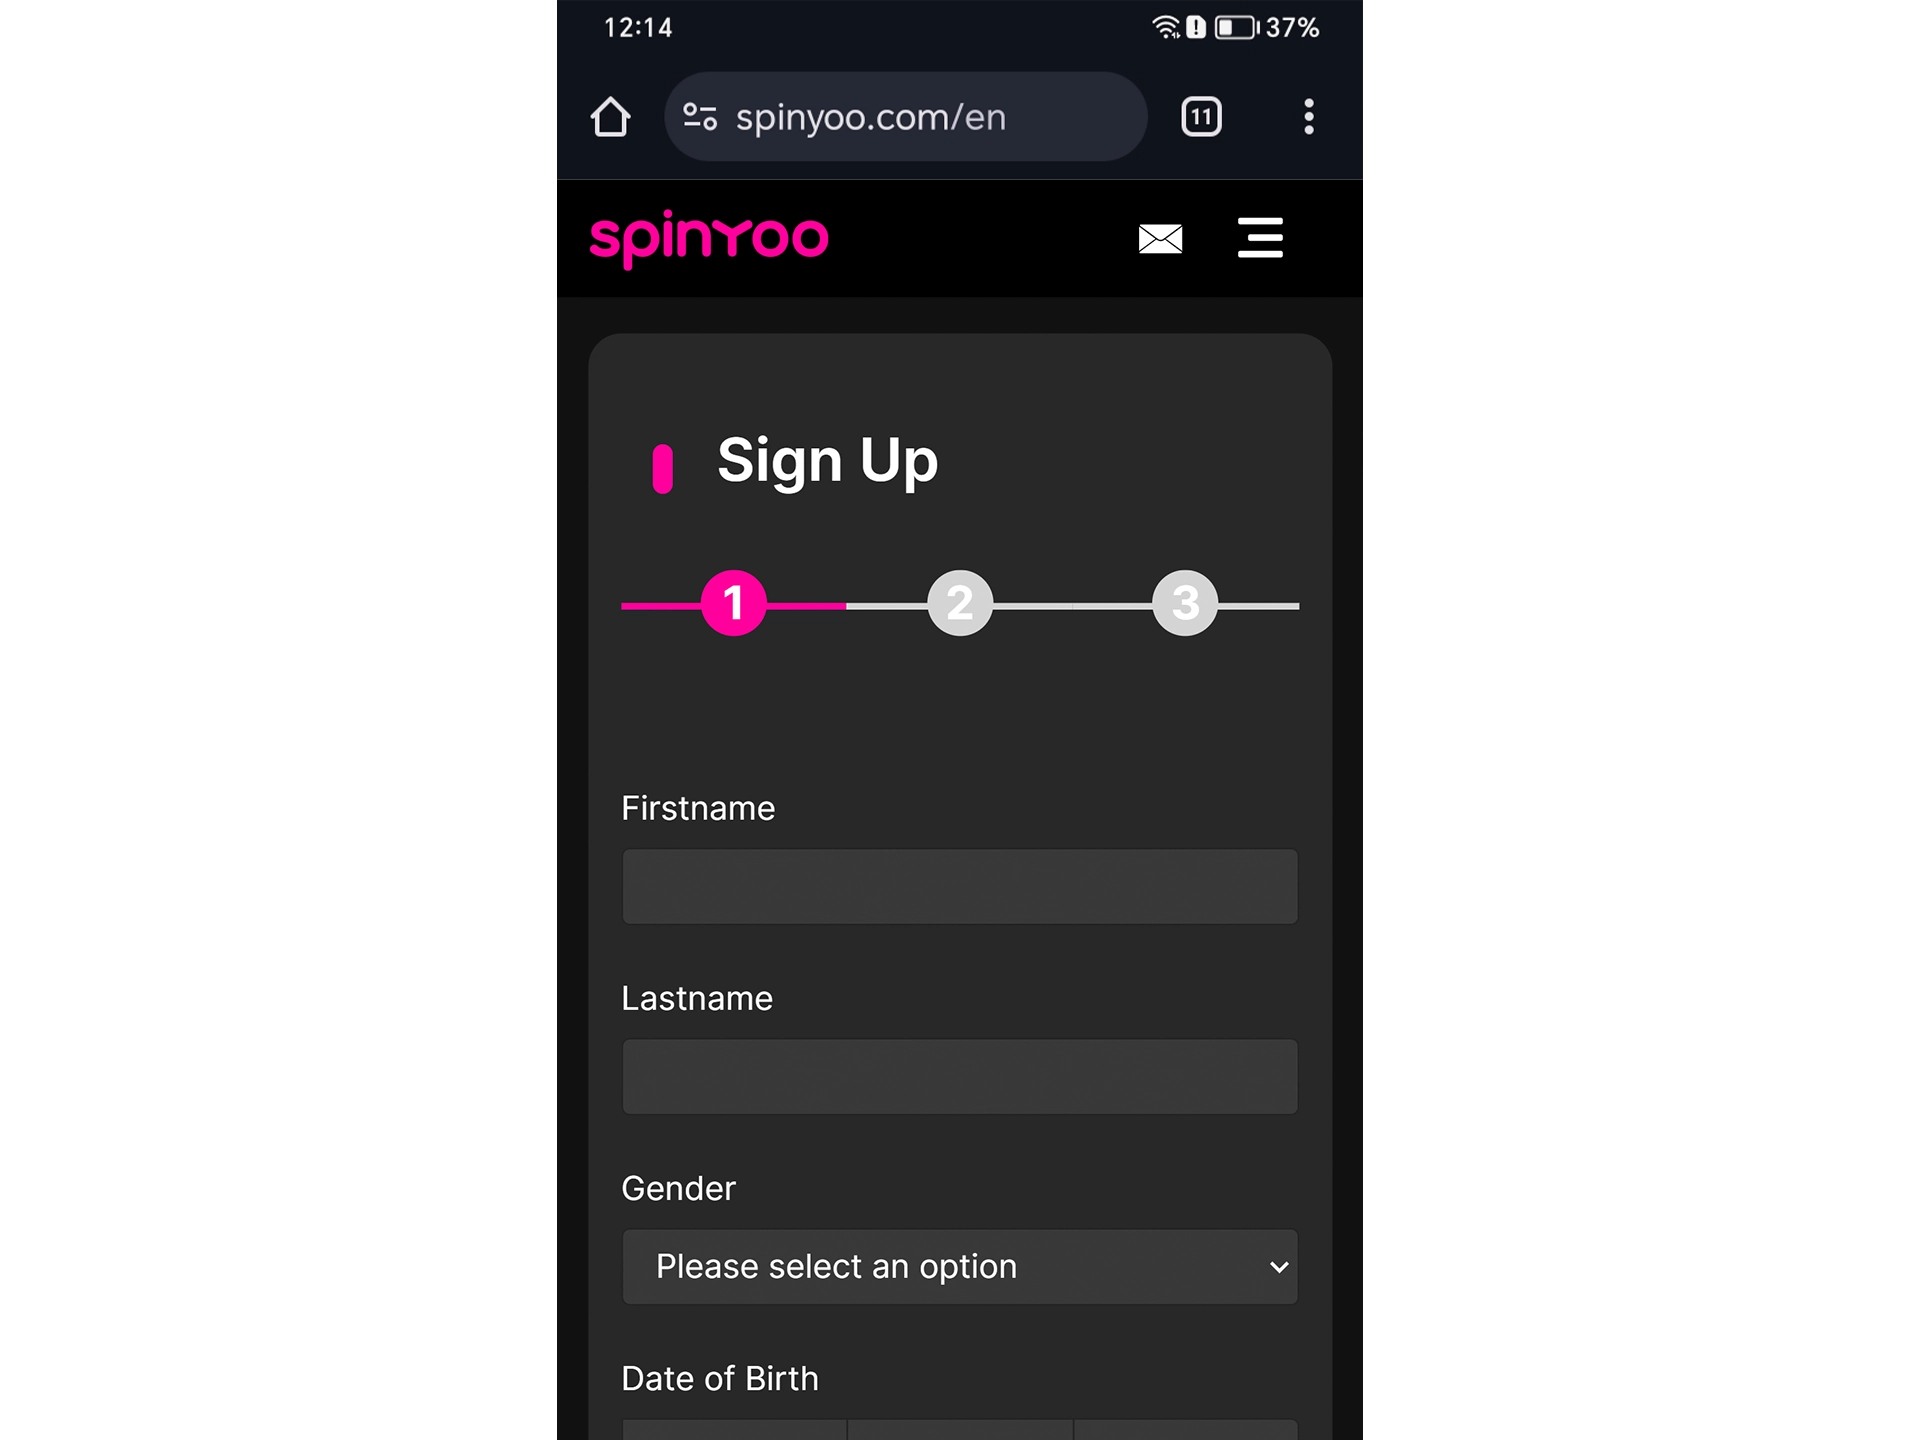 If you don't have a Spinyoo account, start the registration process.